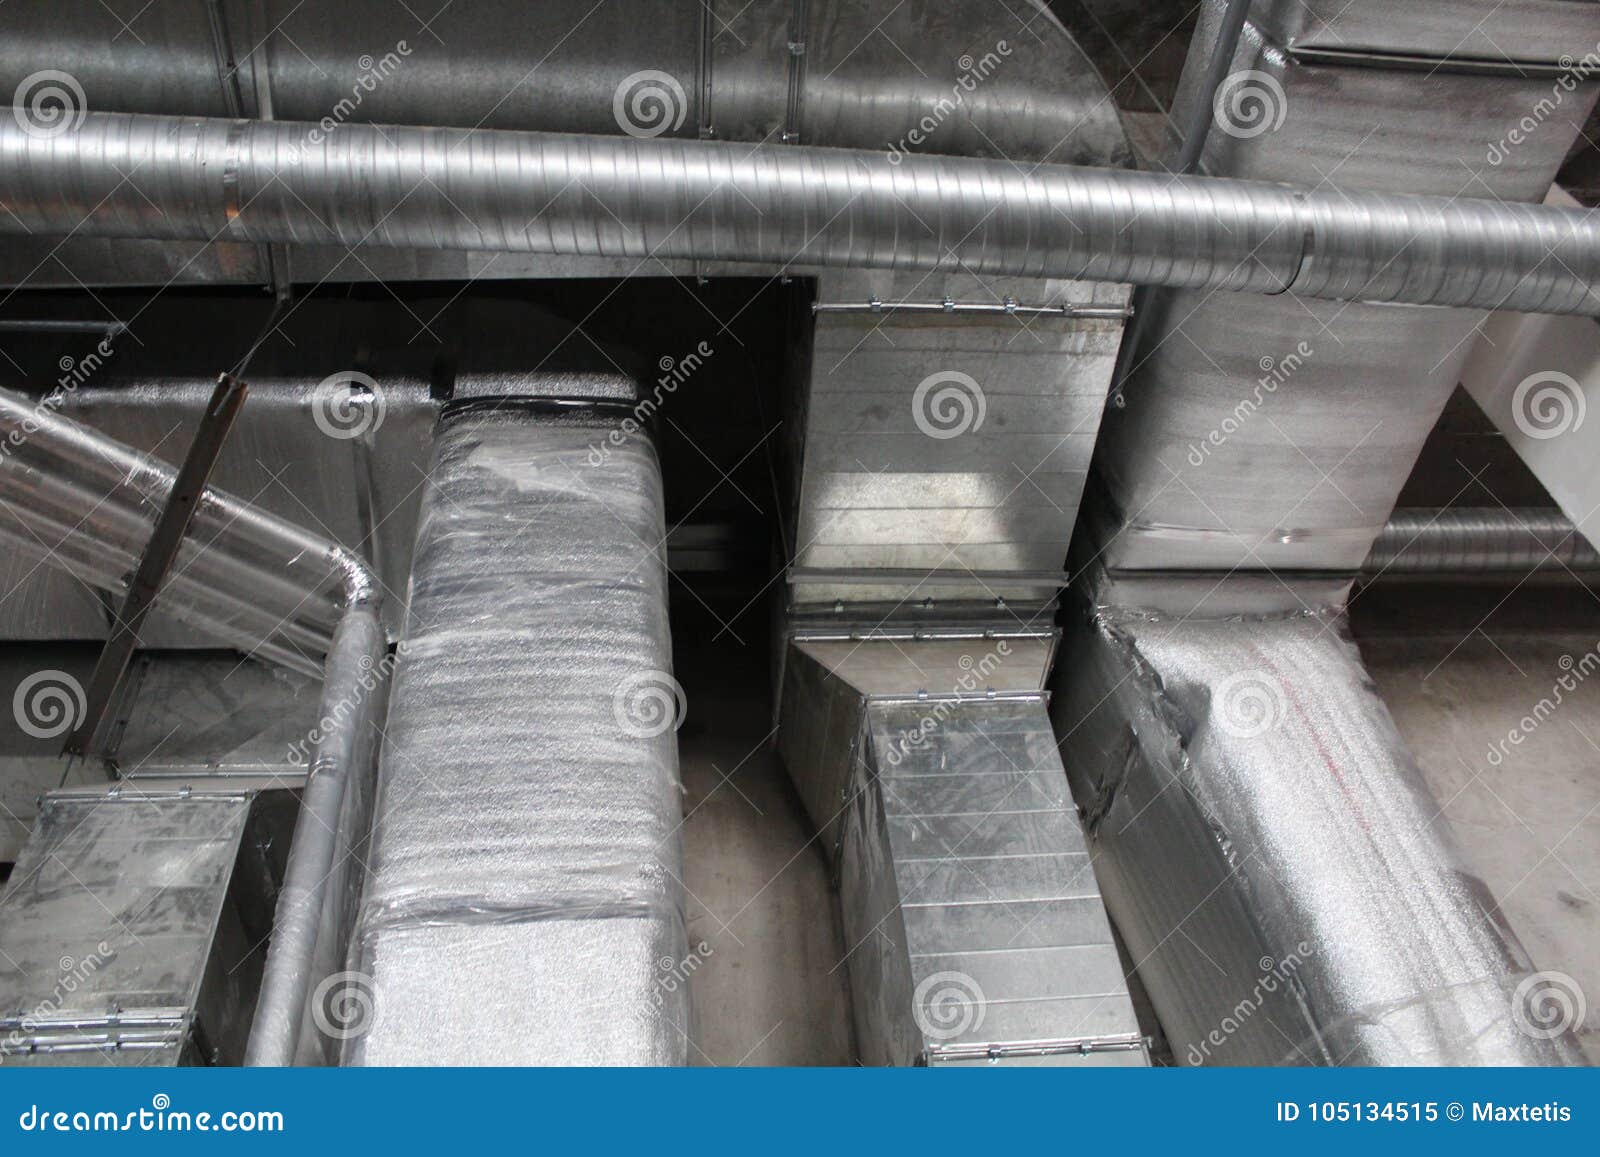 Duct System For Cleanroom. , Ducting Return System, Wall Return System ...